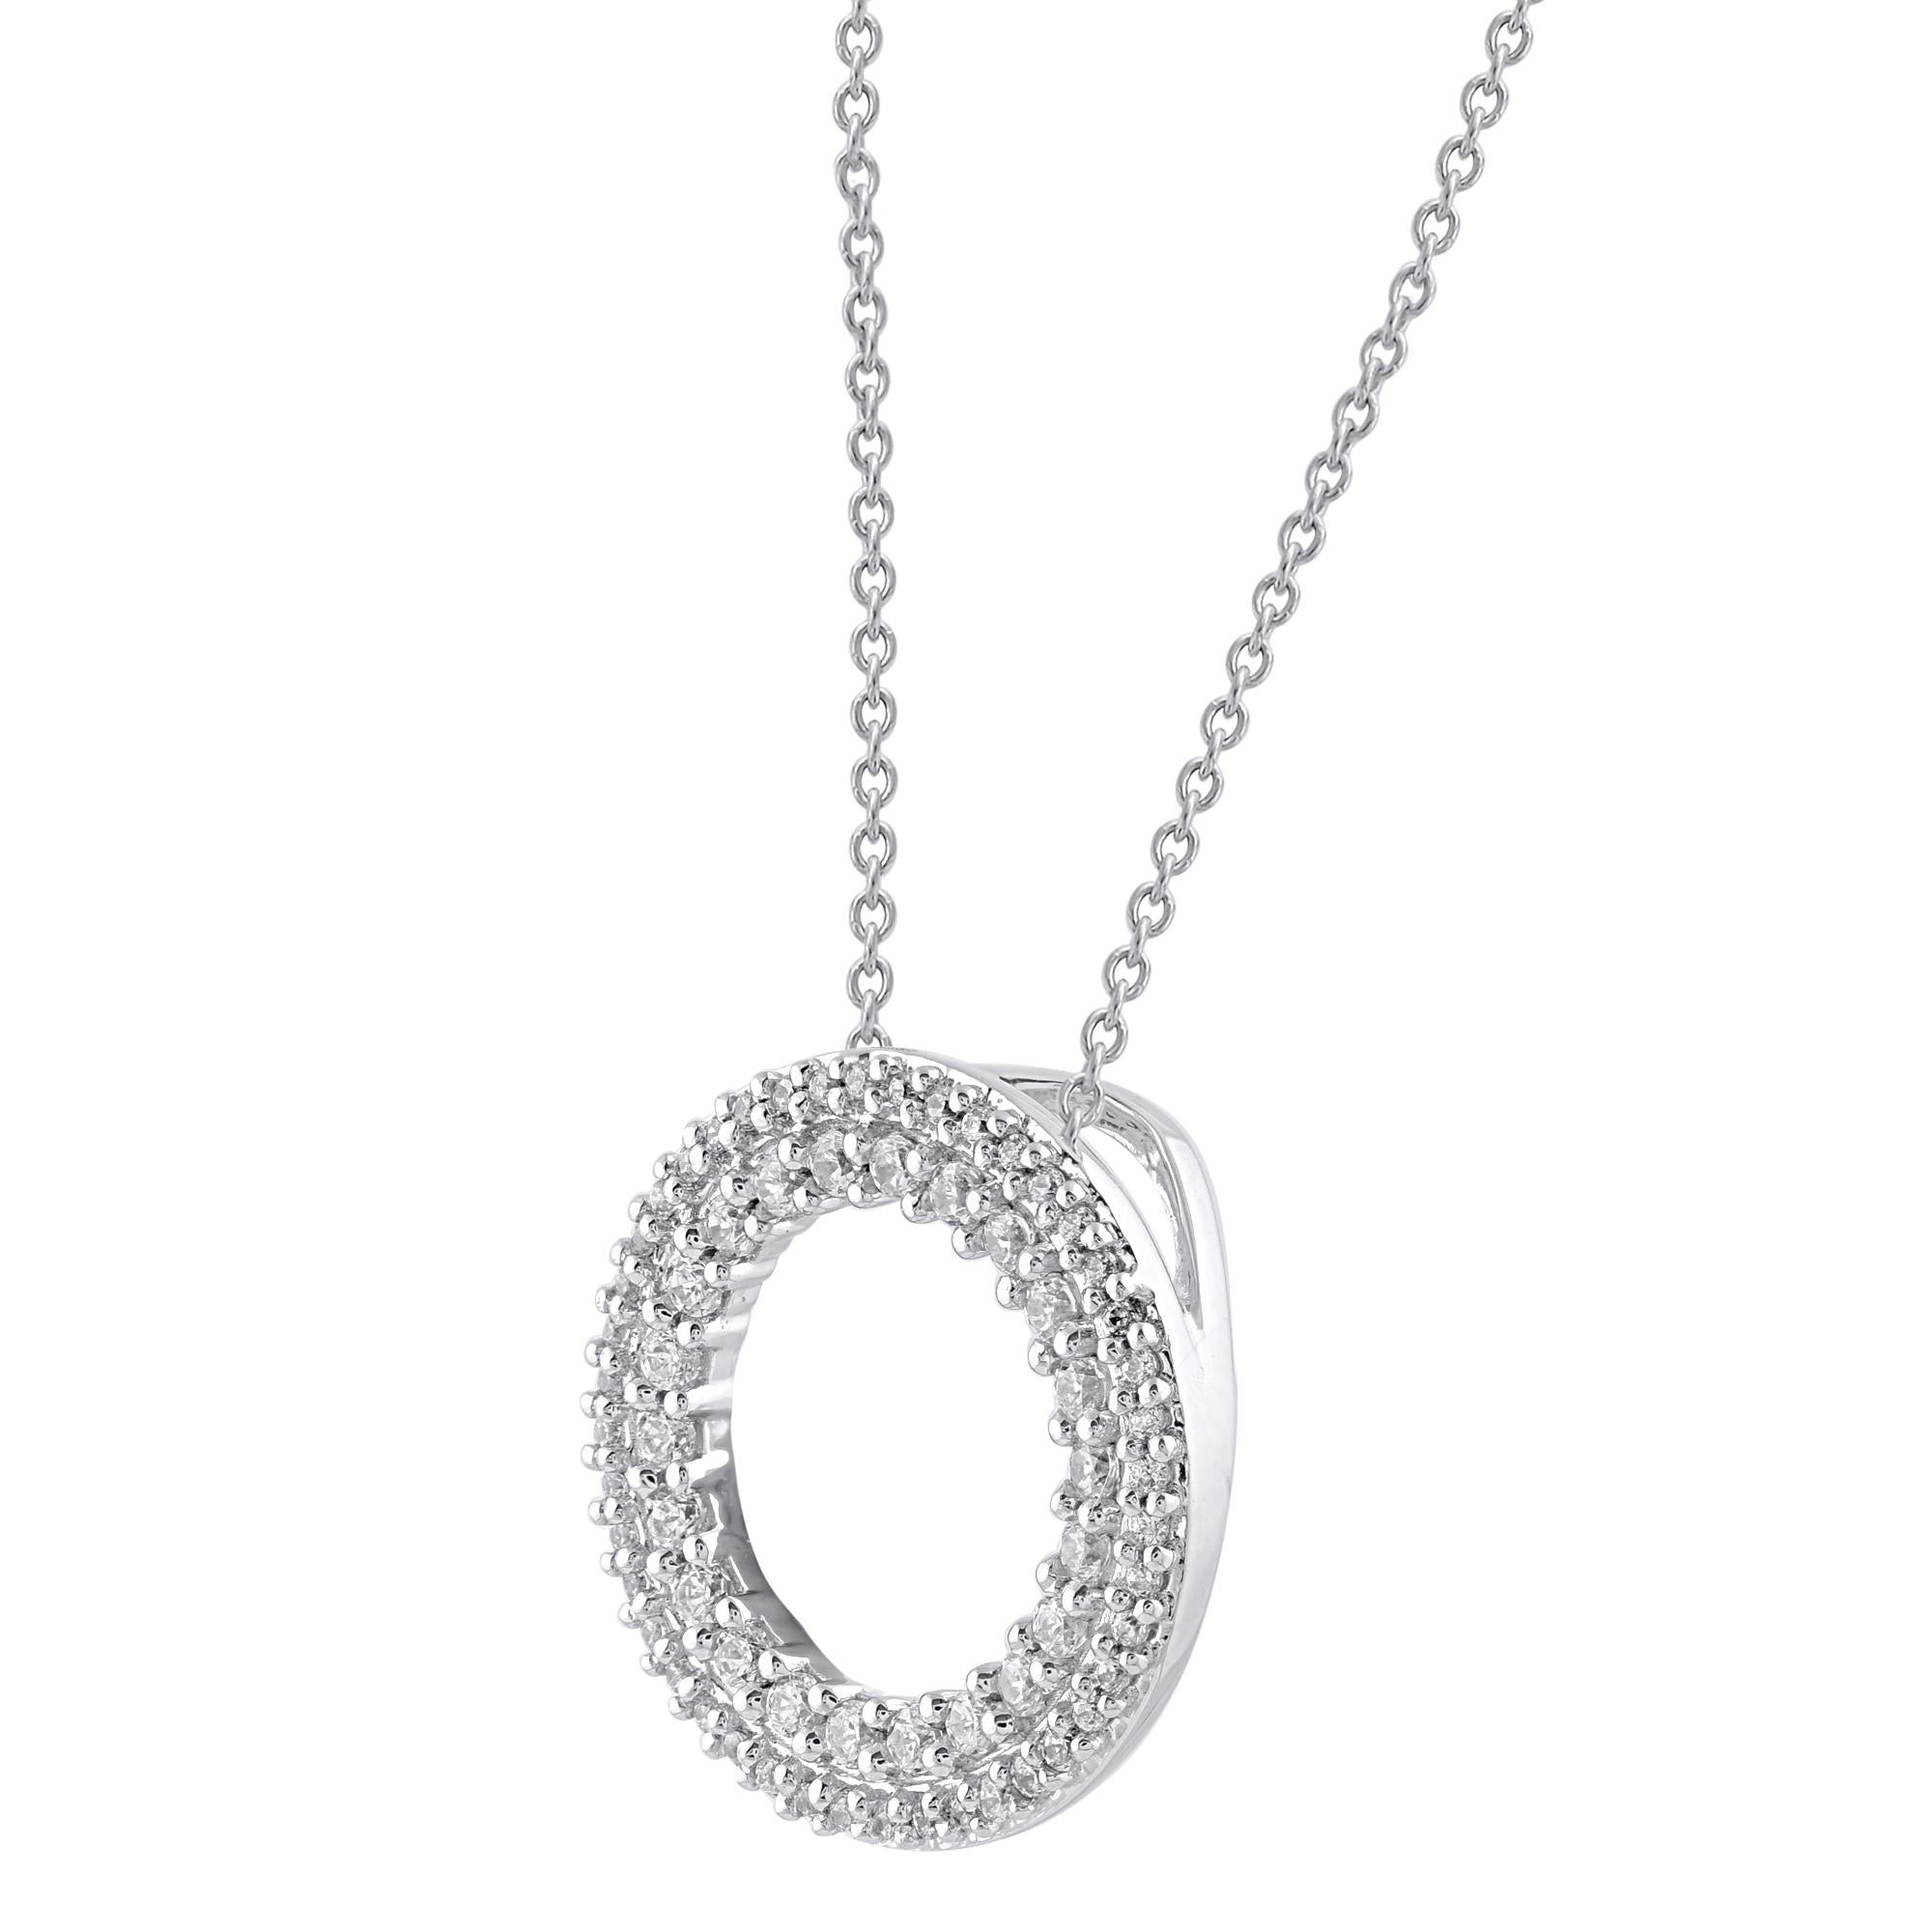 This diamond open circle eternity pendant fits any occasion with ease. These eternity pendants are studded with 66 single cut and brilliant cut natural diamonds in prong setting in 14kt white gold. Diamonds are graded as H-I color and I-2 clarity.